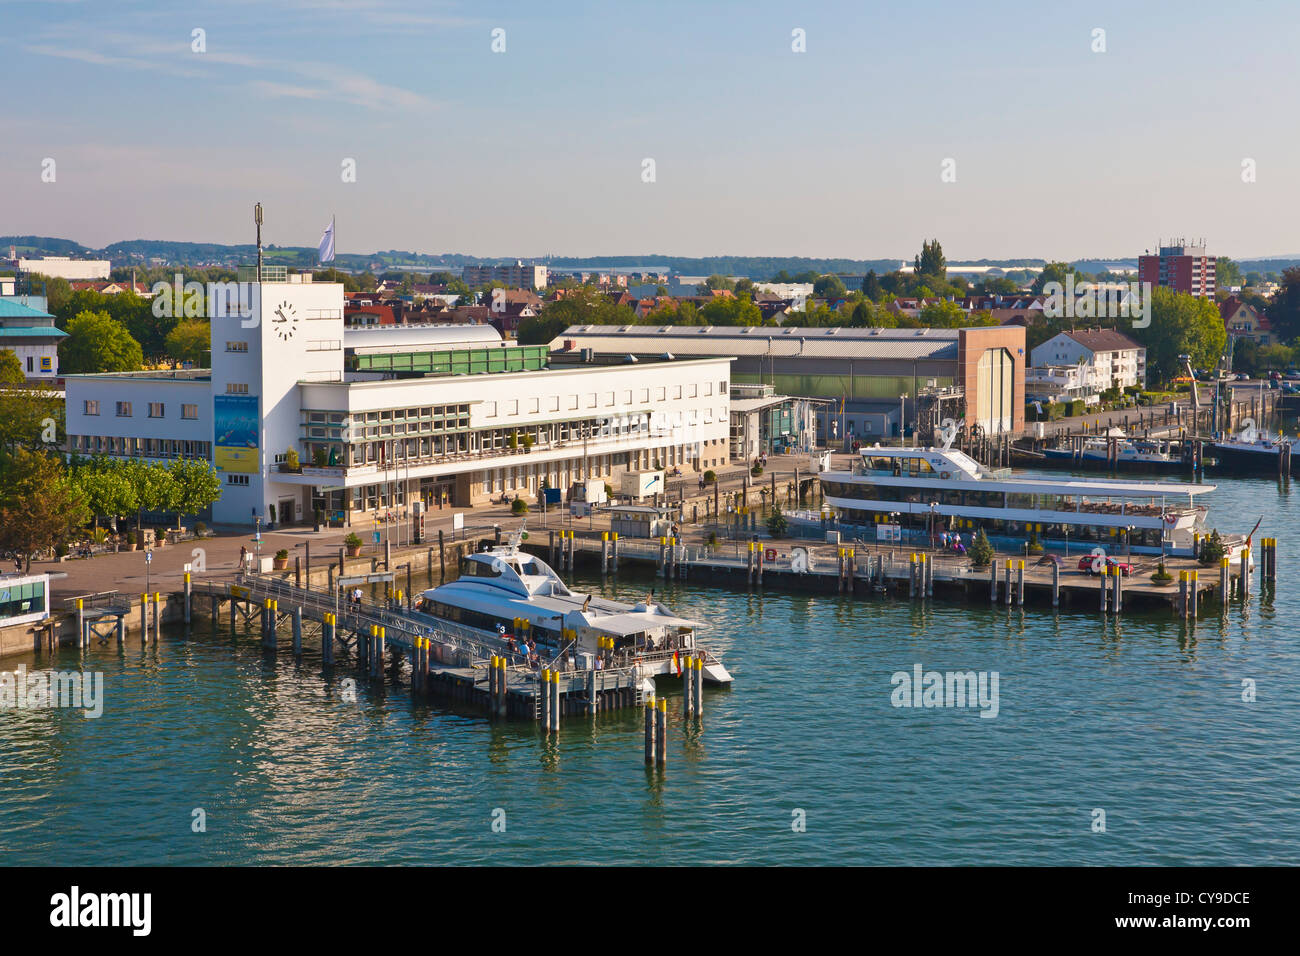 ZEPPELIN MUSEUM AT THE HARBOUR IN FRIEDRICHSHAFEN, LAKE CONSTANCE, BADEN-WURTTEMBERG, GERMANY Stock Photo